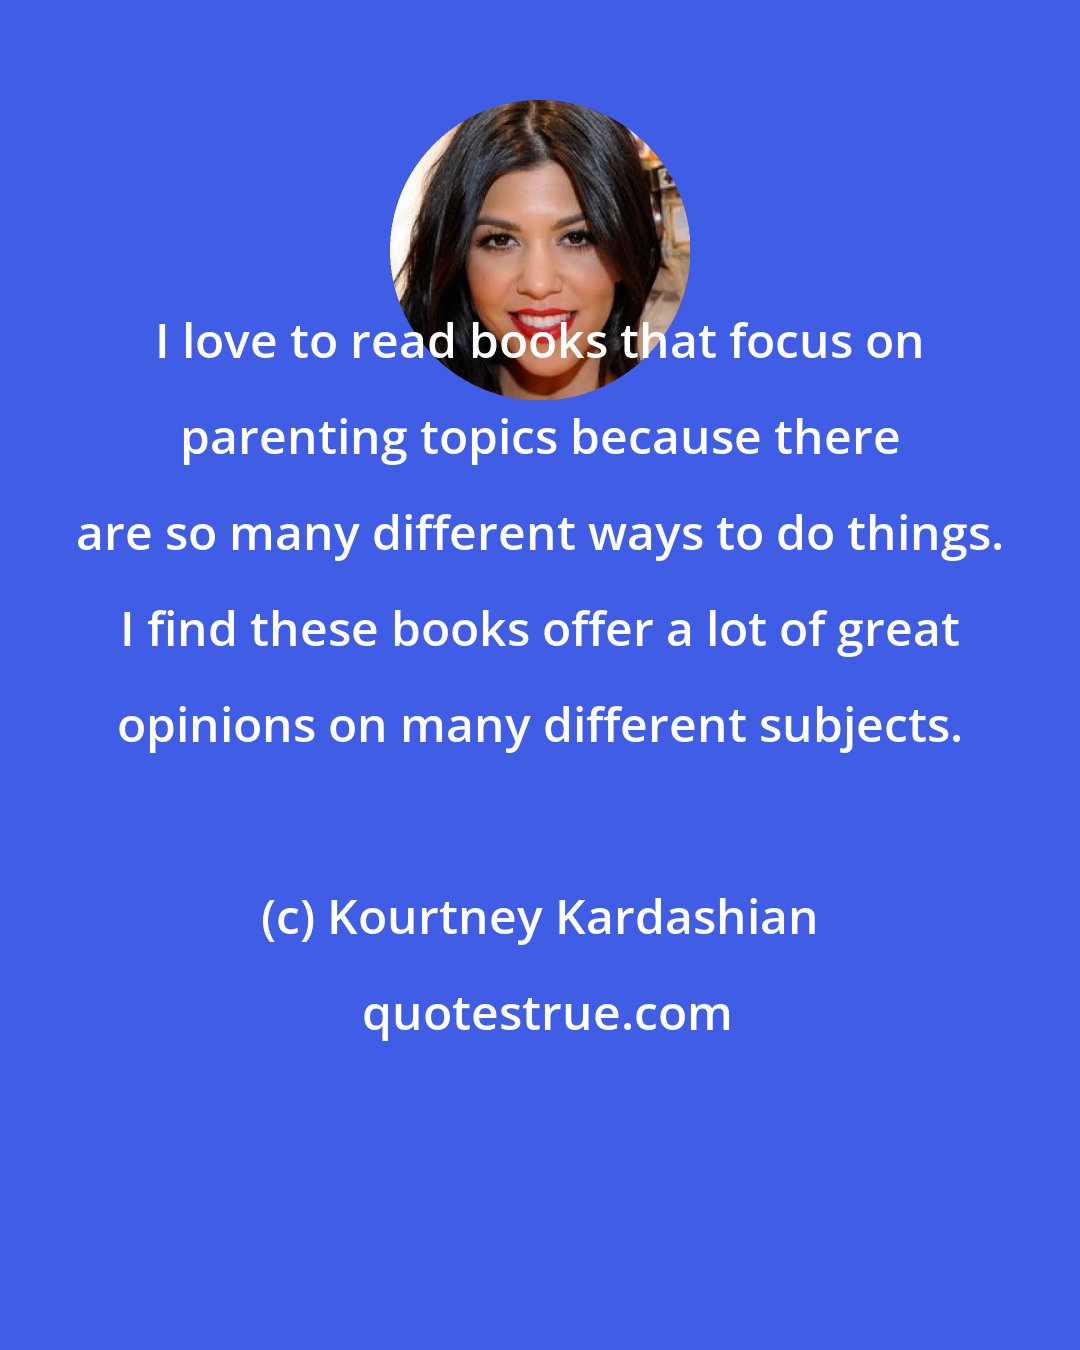 Kourtney Kardashian: I love to read books that focus on parenting topics because there are so many different ways to do things. I find these books offer a lot of great opinions on many different subjects.